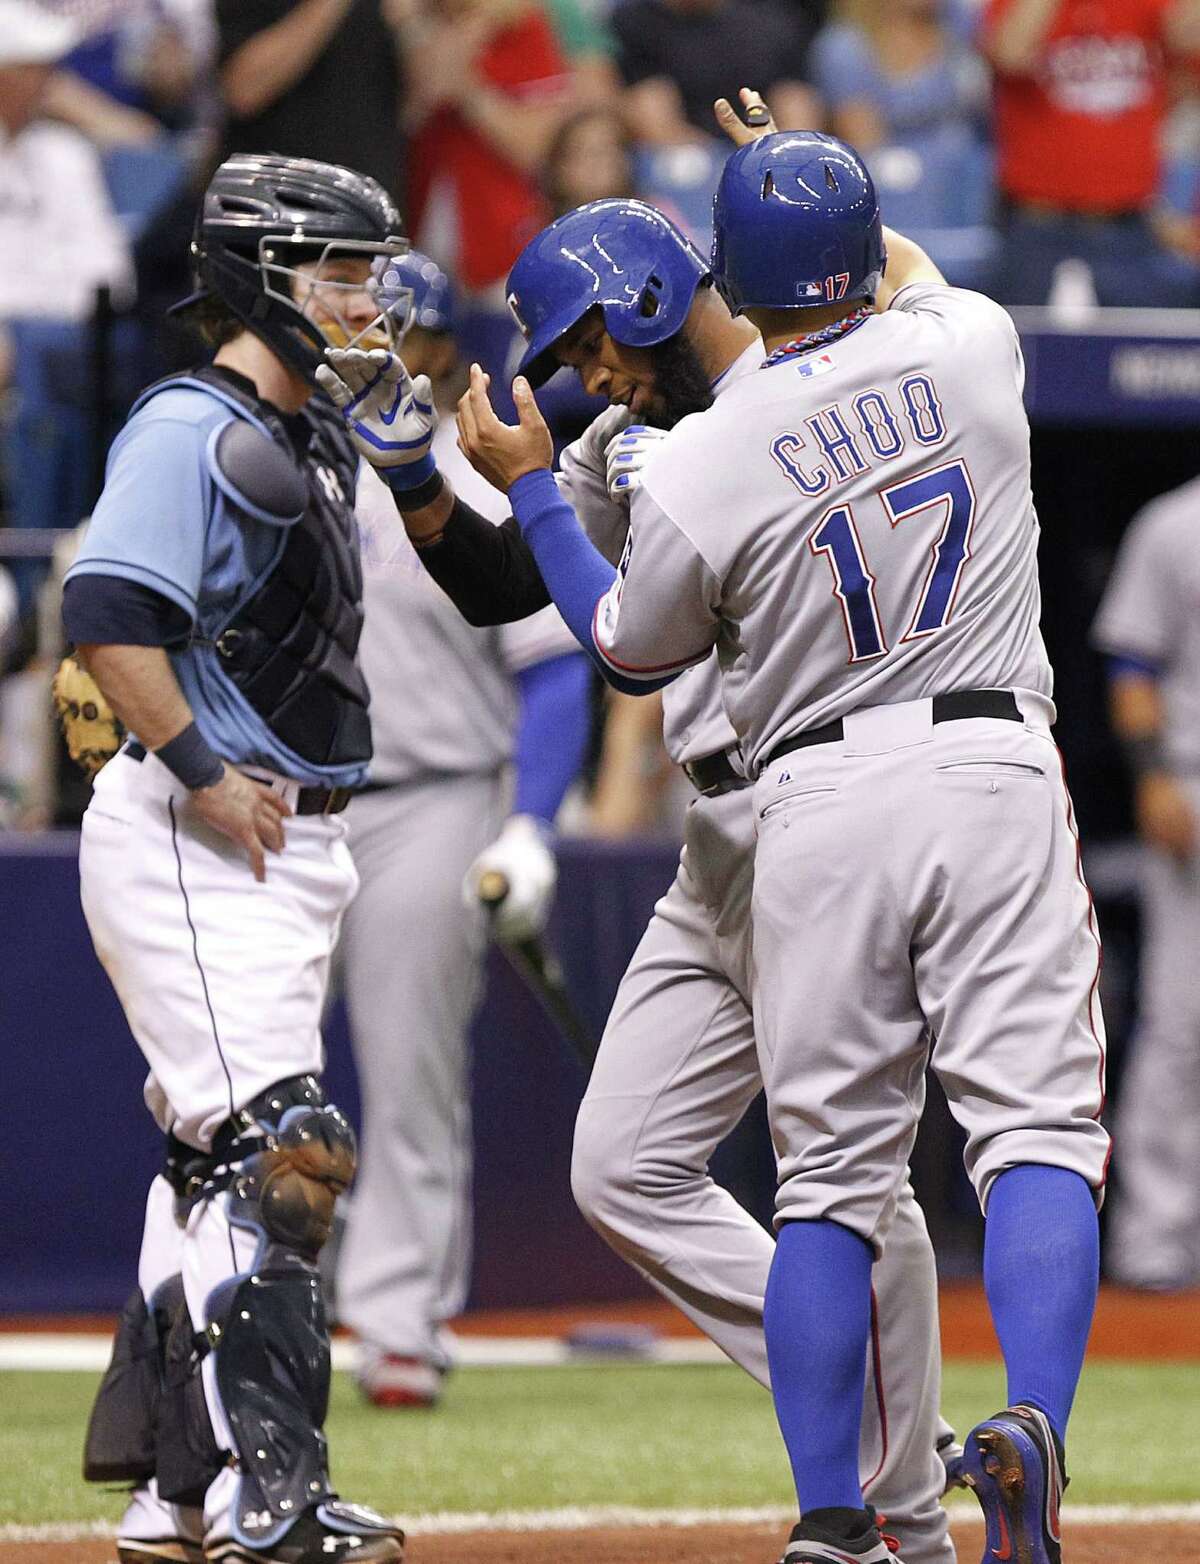 The Rangers' Elvis Andrus (center) is congratulated by Shin-Soo Choo after his two-run homer in the eighth as Rays catcher Ryan Hanigan watches.